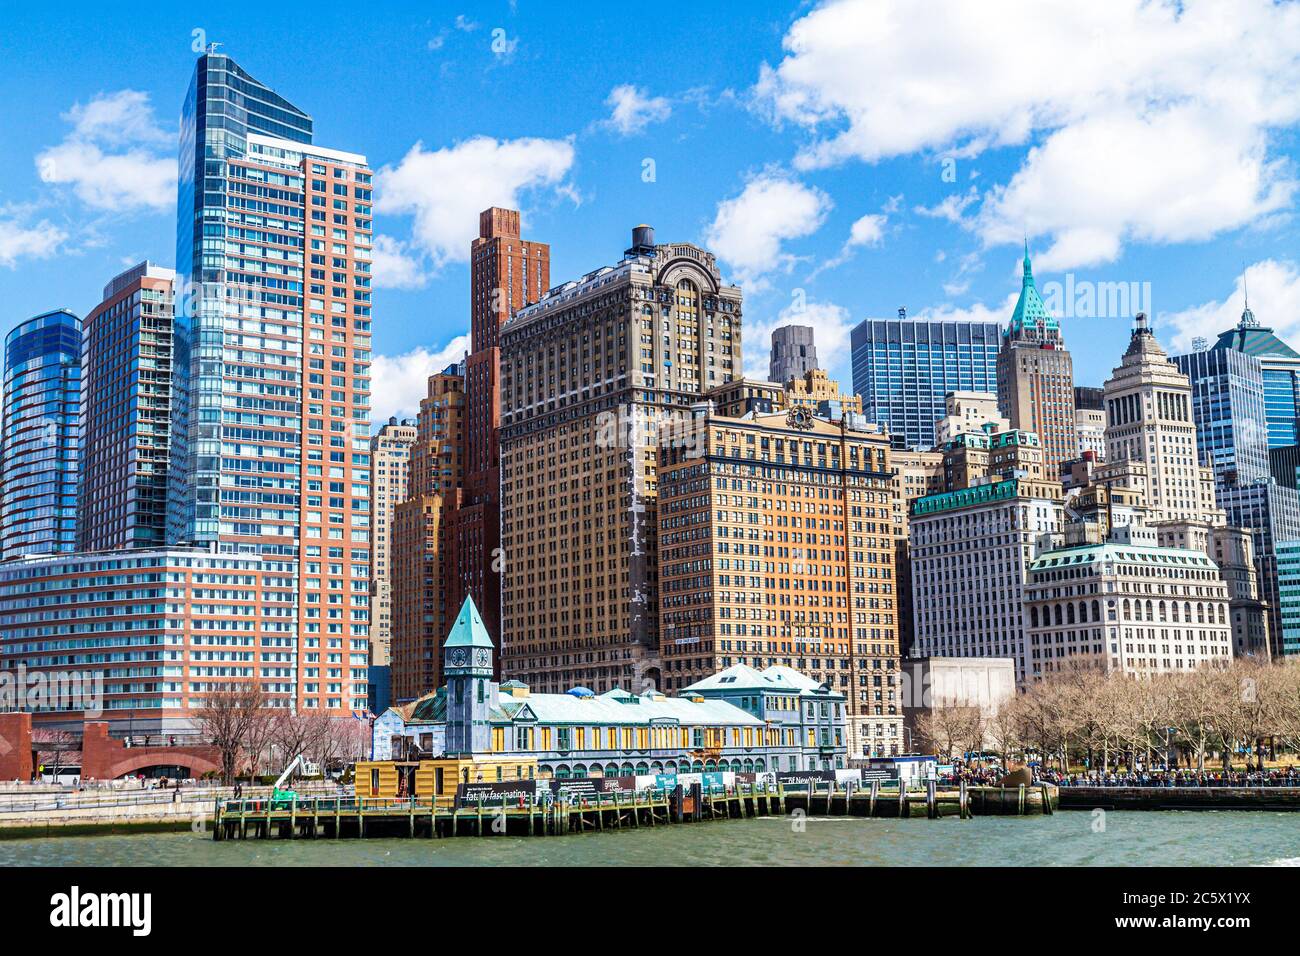 New York City,NYC NY Lower,Manhattan,Battery Park,Financial District,FiDi,New York Harbor,harbour,Hudson River,Statue Cruises,City Pier A,clock tower, Stock Photo